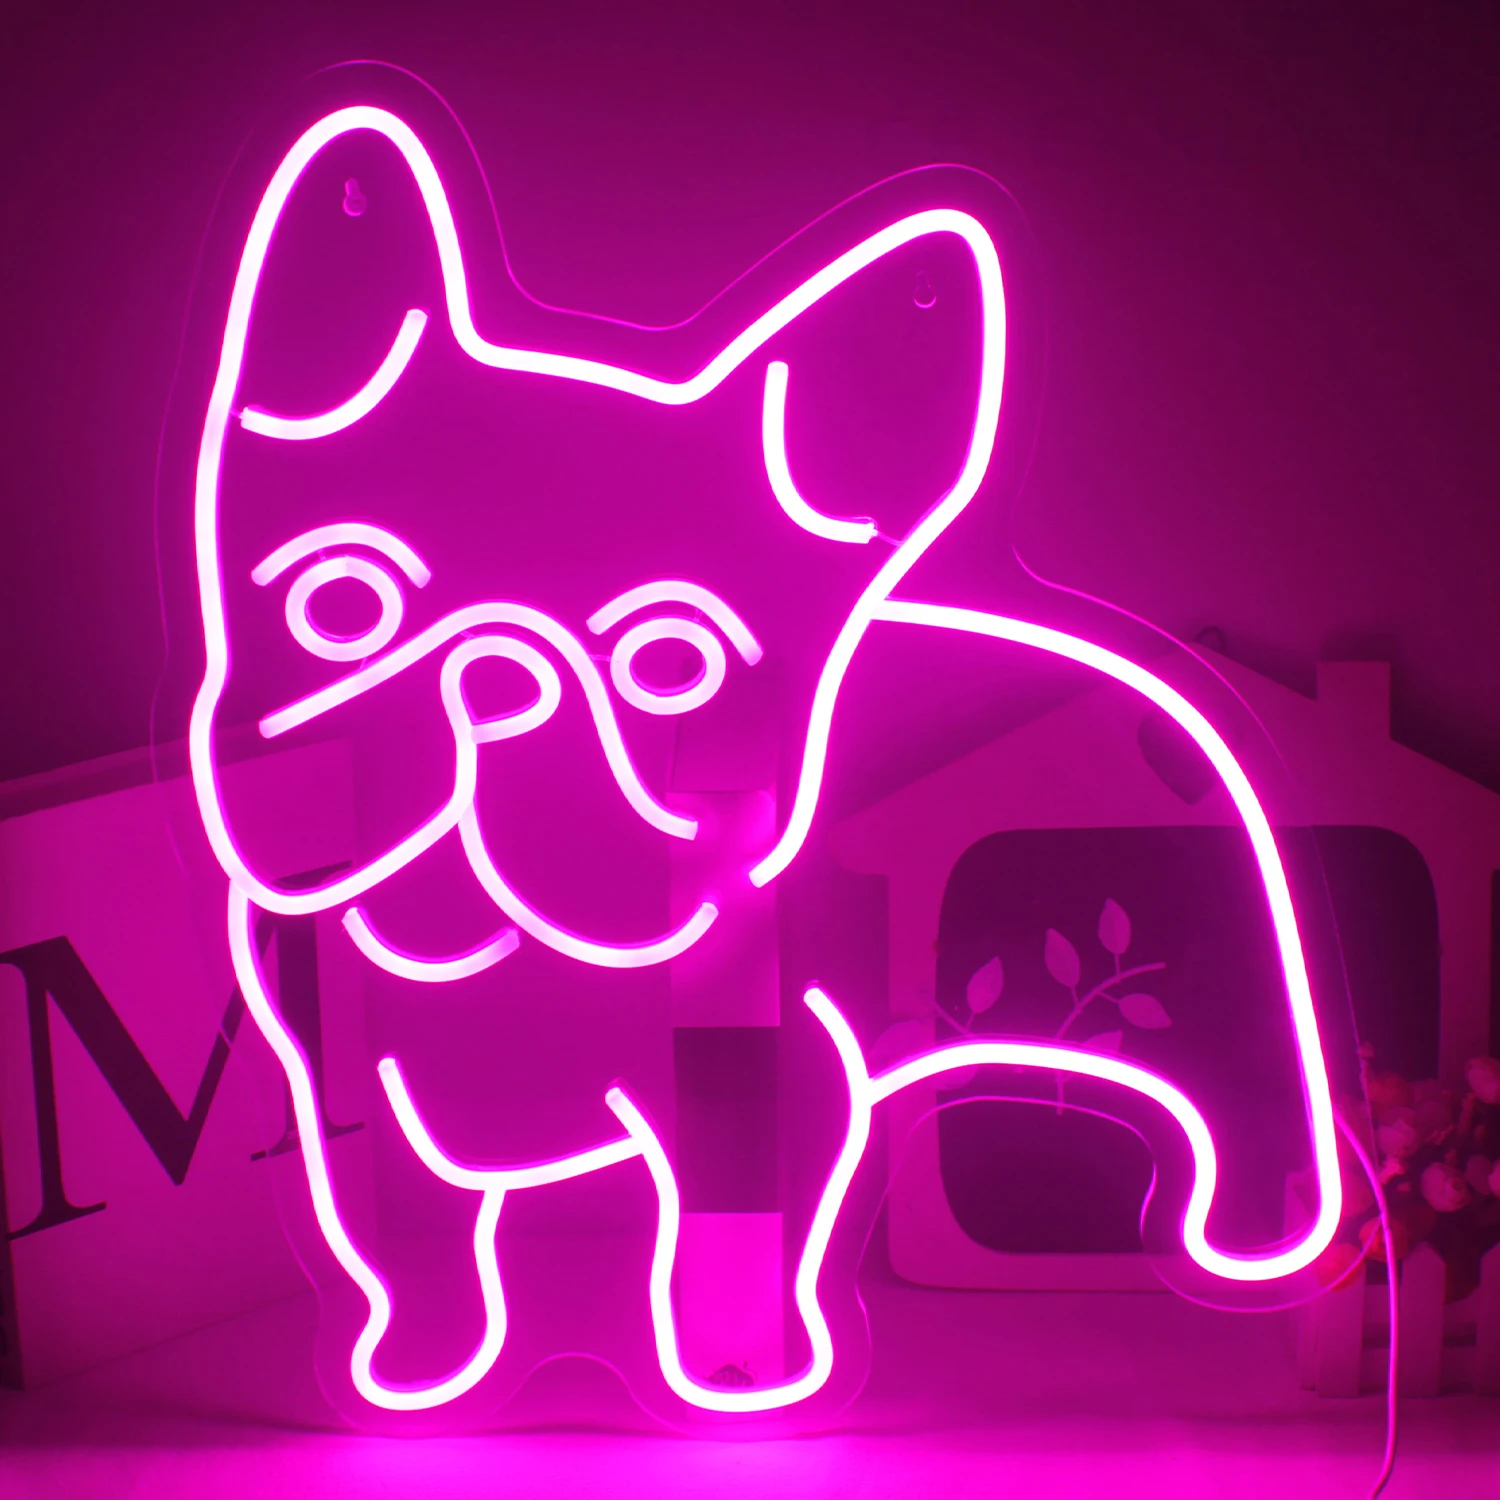 Dog Pink Neon Light Sign Wall Hanging Light For Sports Room Decor Club Party Bar Gamers Xmas Gift Dorm Room Decoration Light